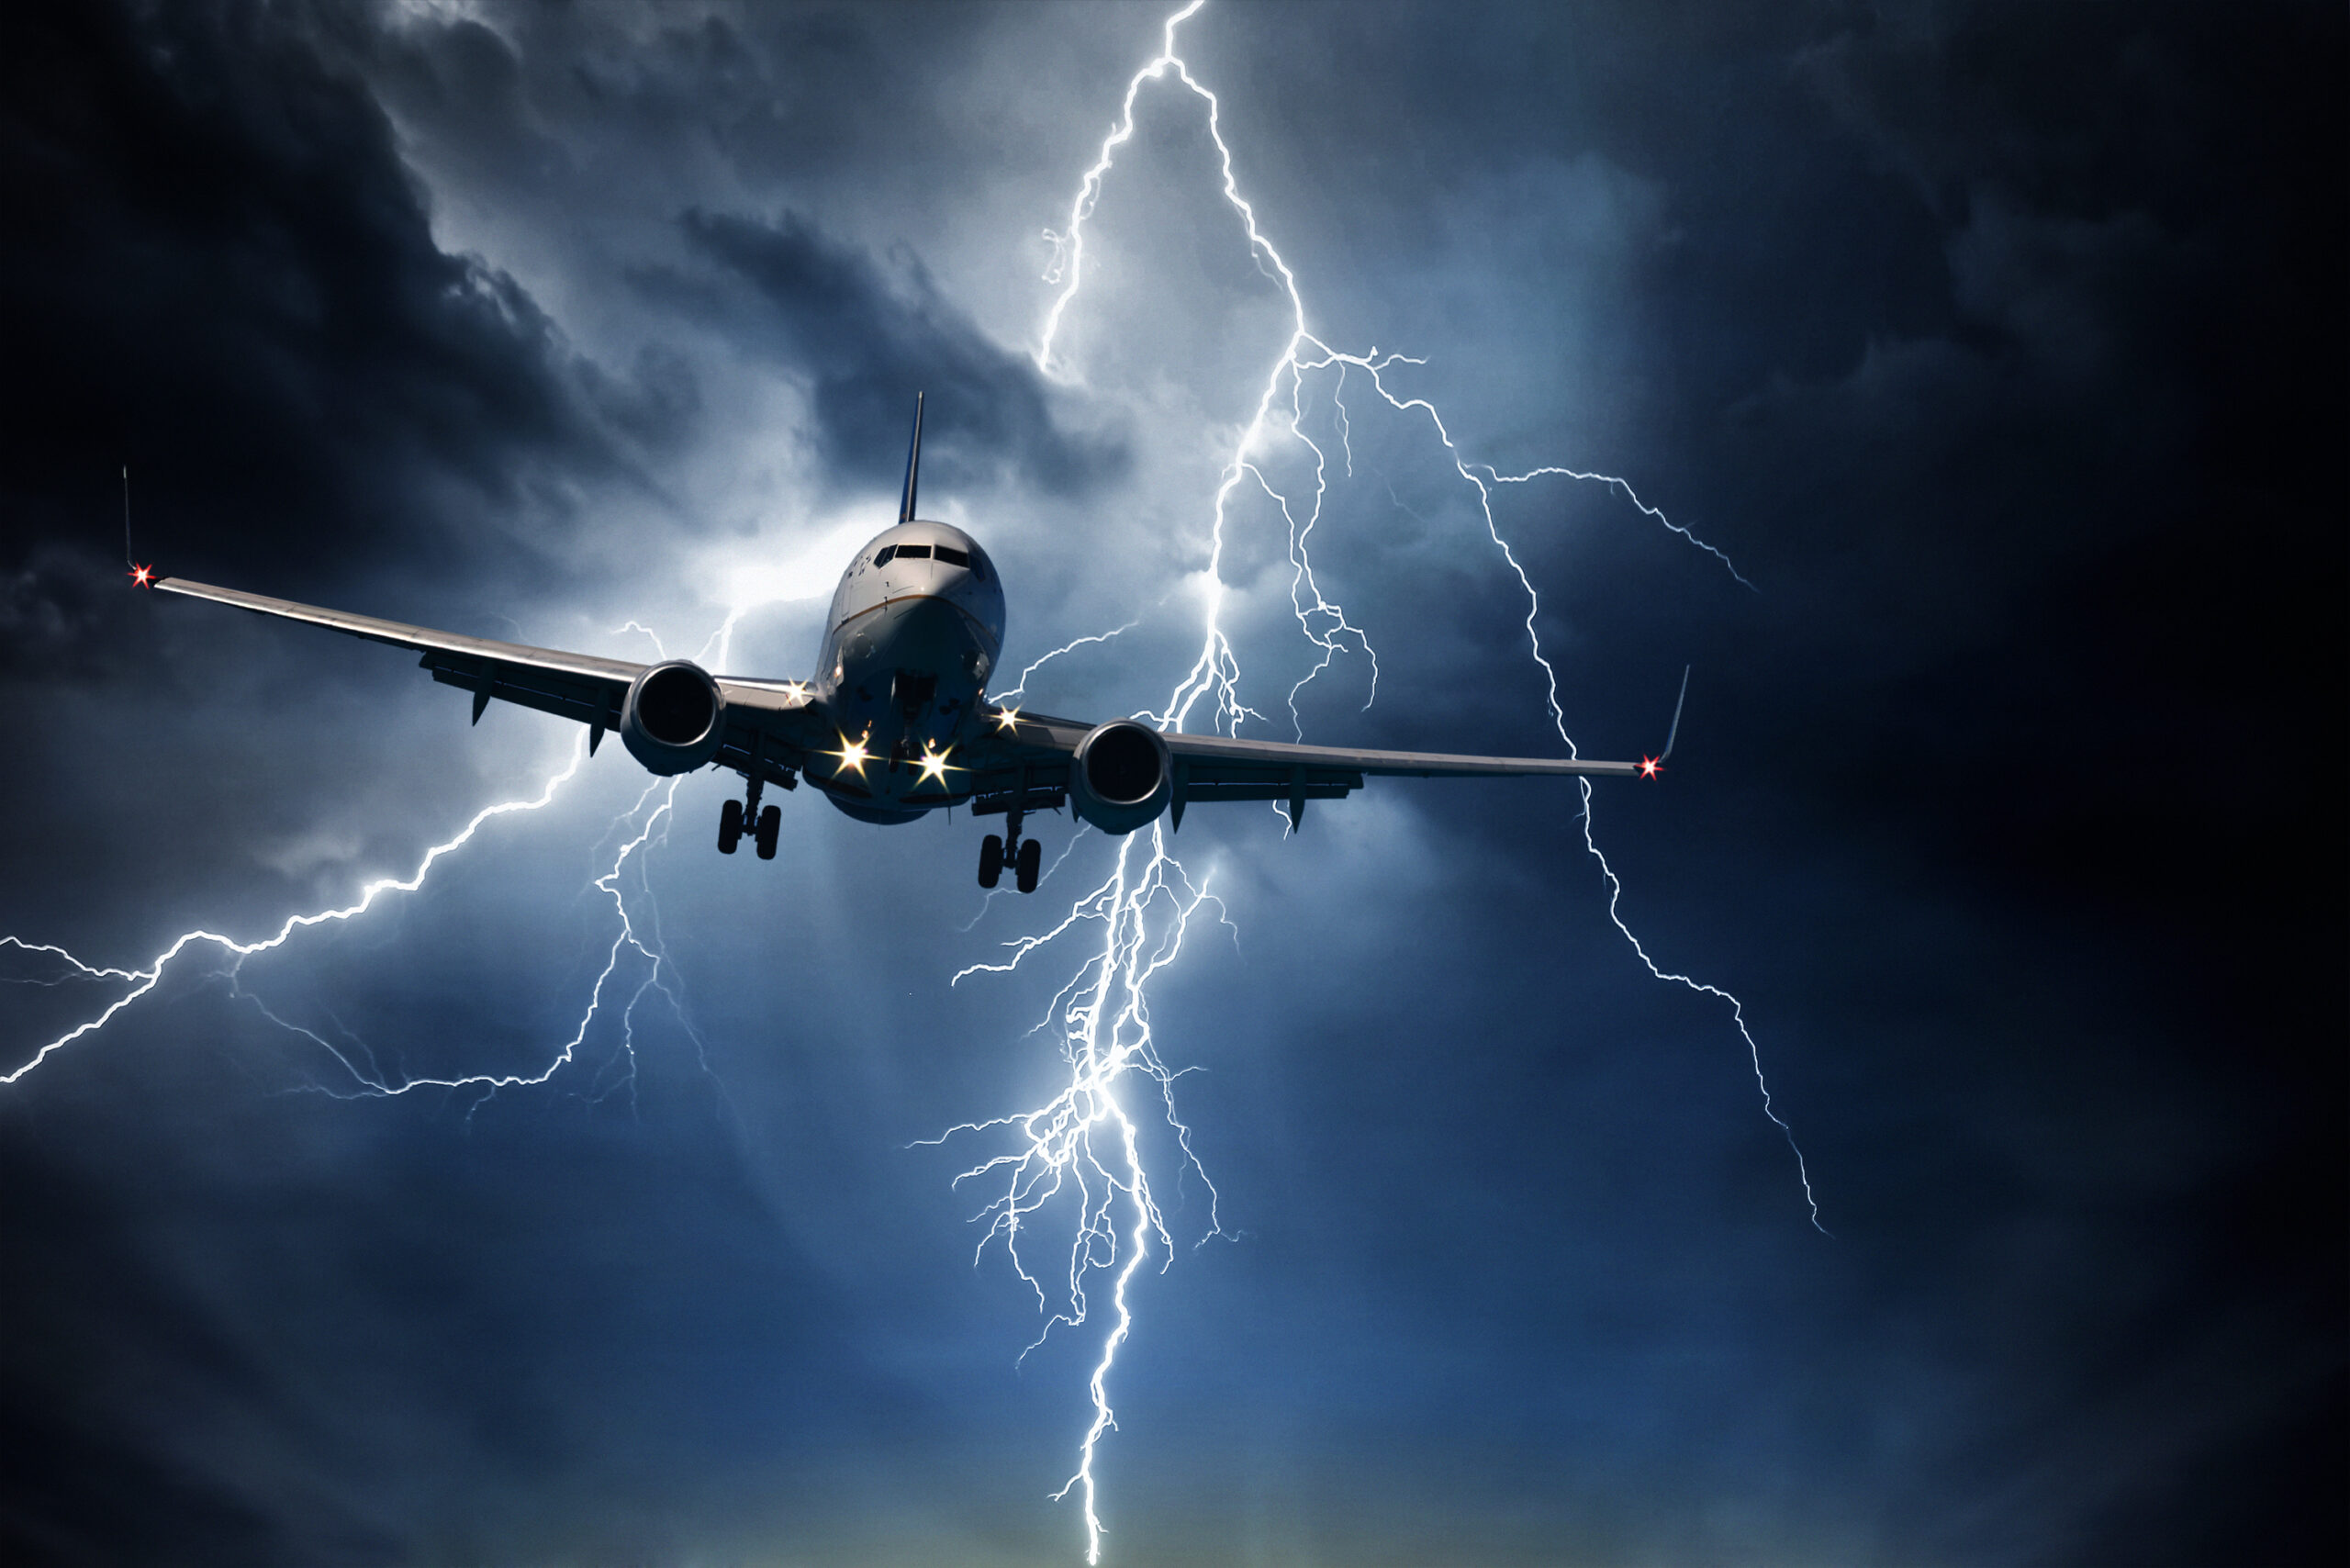 Aircraft travelling through stormy sky